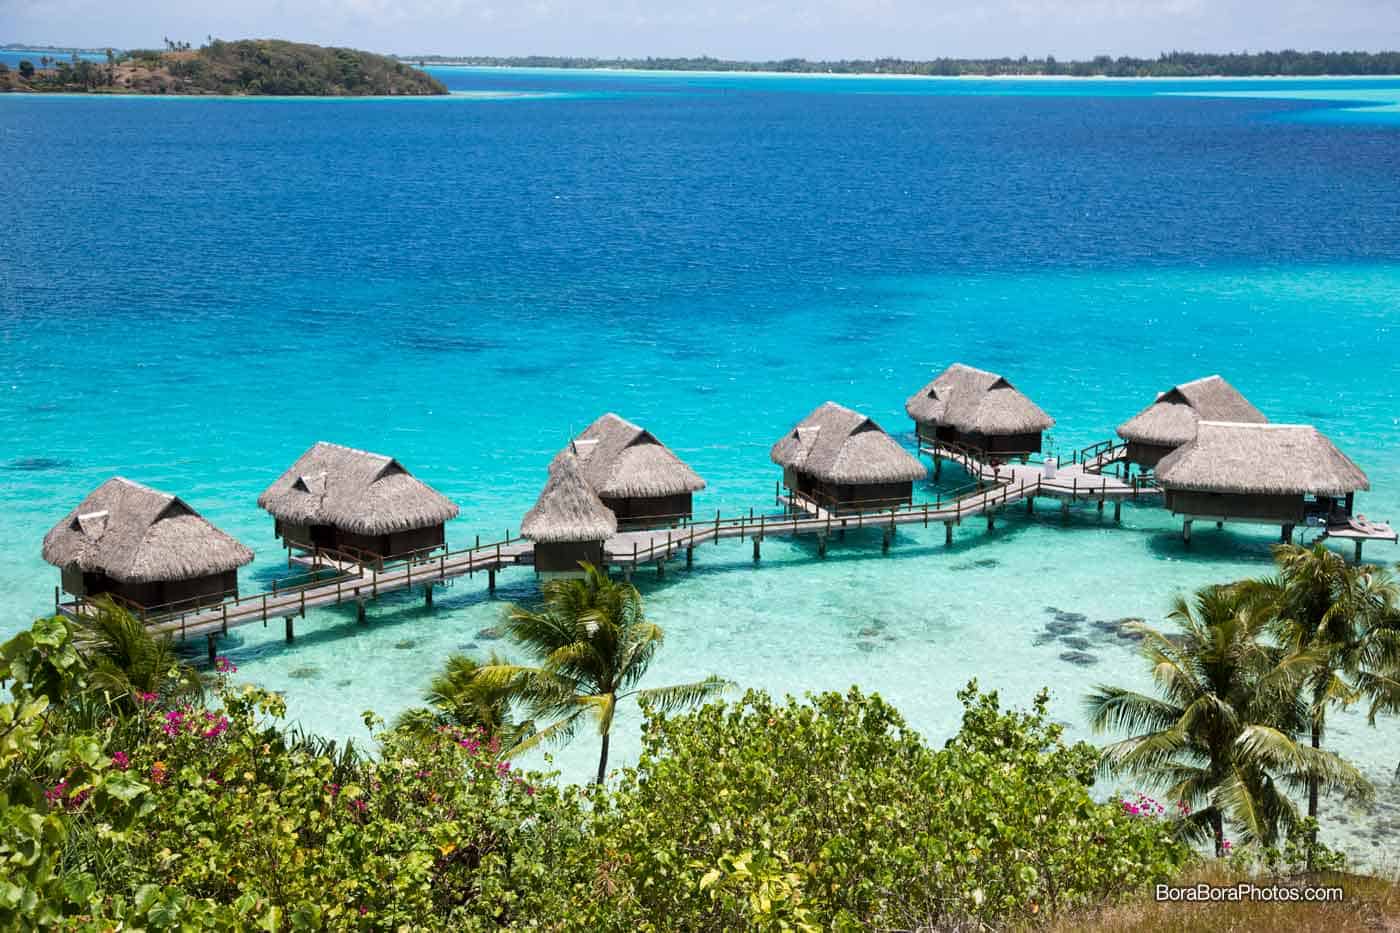 Overwater bungalows at the Sofitel private island resort